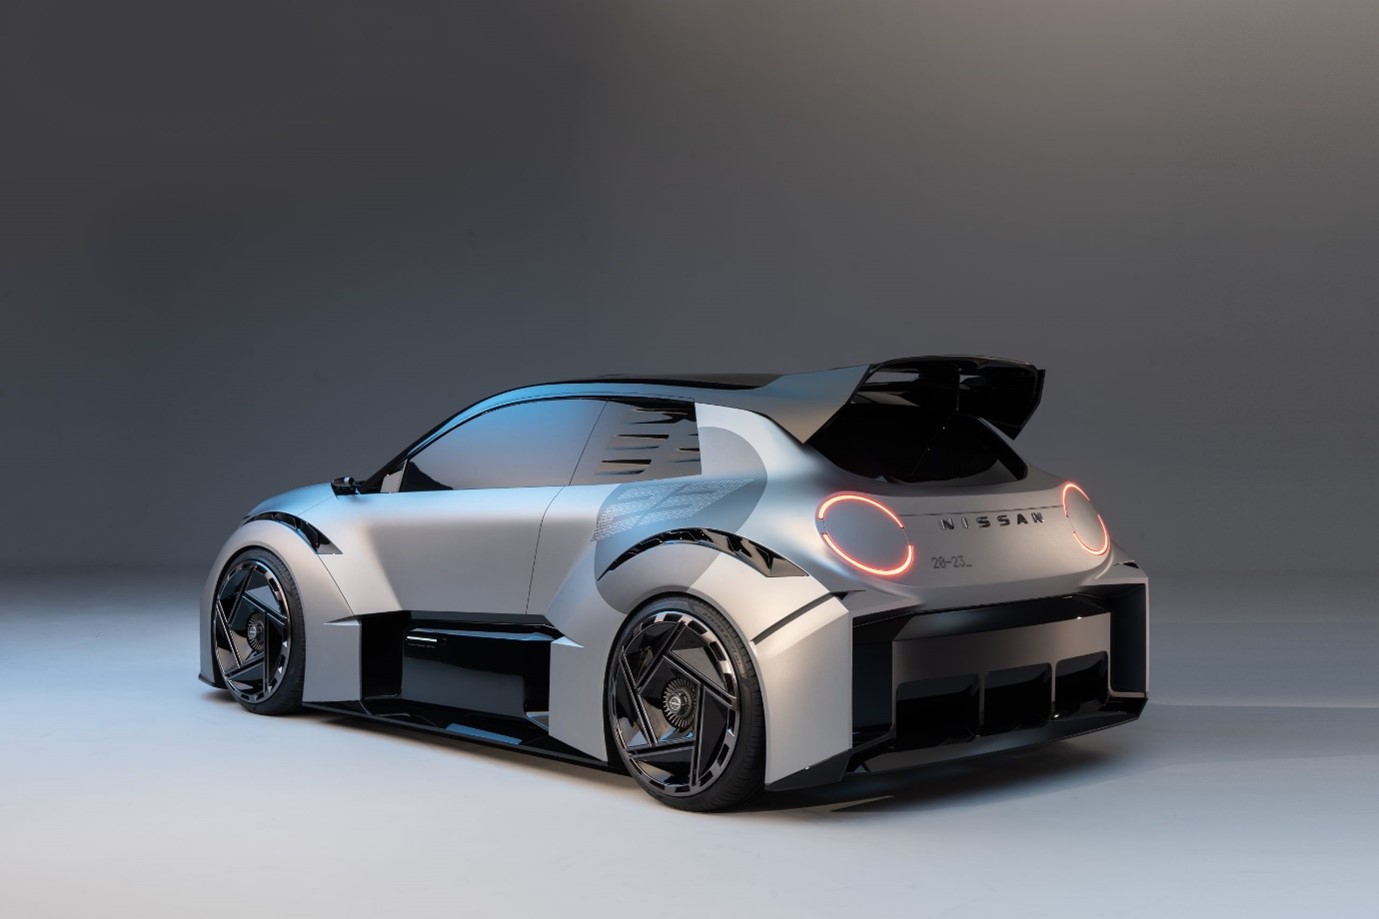 Nissan celebrates 20th anniversary of London design studio with unveiling of Concept 20-23 show car